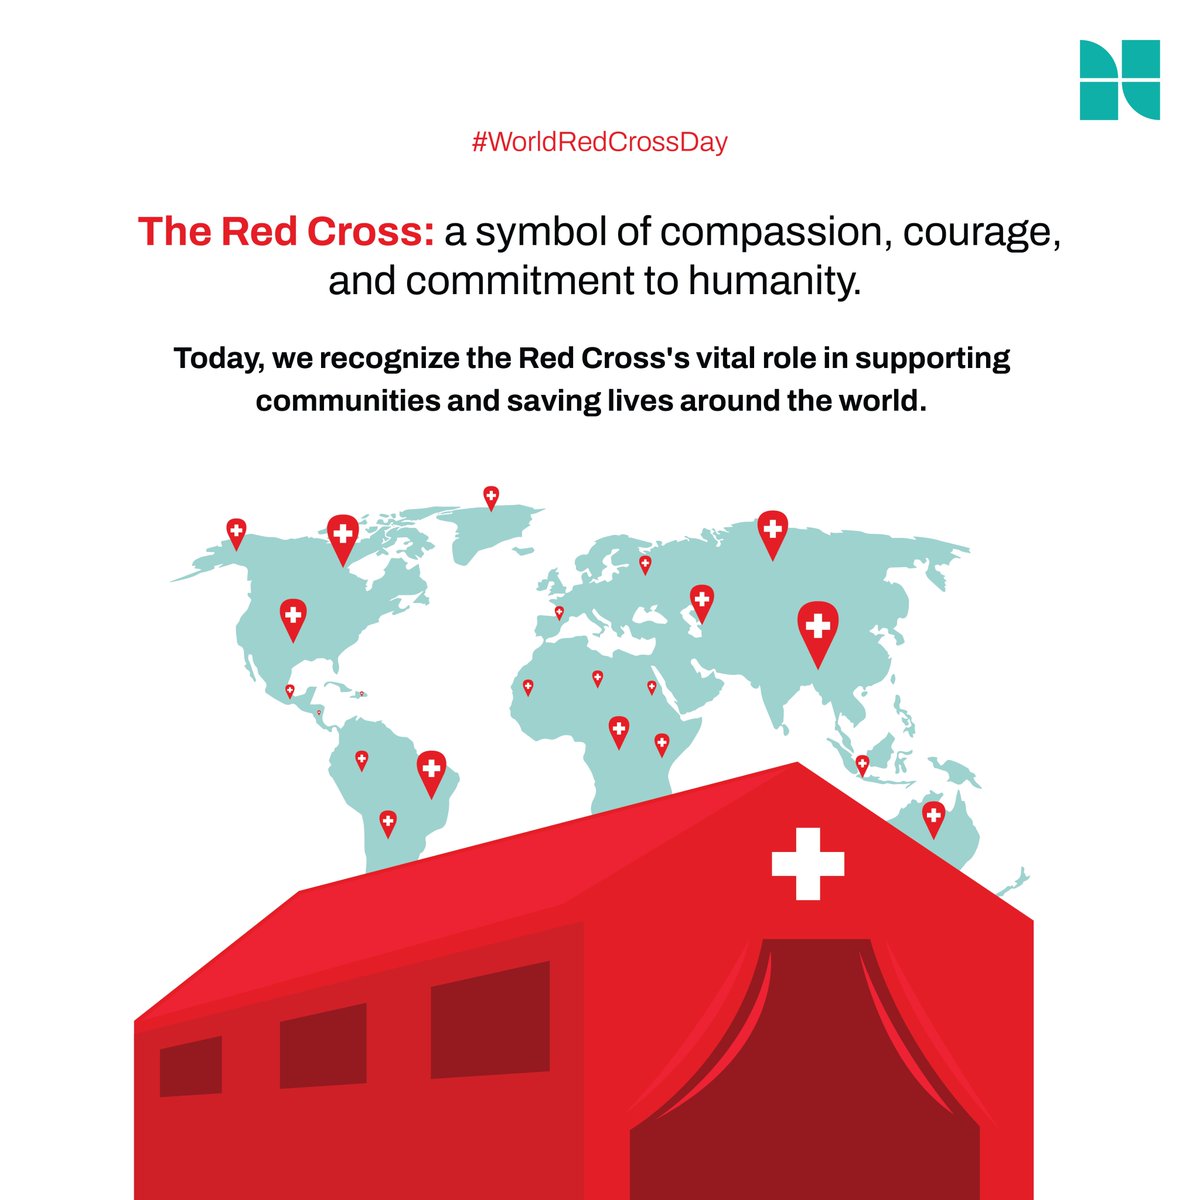 The Red Cross teaches us that even in the darkest times, there is always hope, always help, always humanity...

#worldredcrossday #redcrossheroes #omega3 #pufa #EPA #DHA #PharmaceuticalCompanies #ApiSupplier #AnalyticalMethodDevelopment #NutraceuticalTablets #NewedgeOverseas